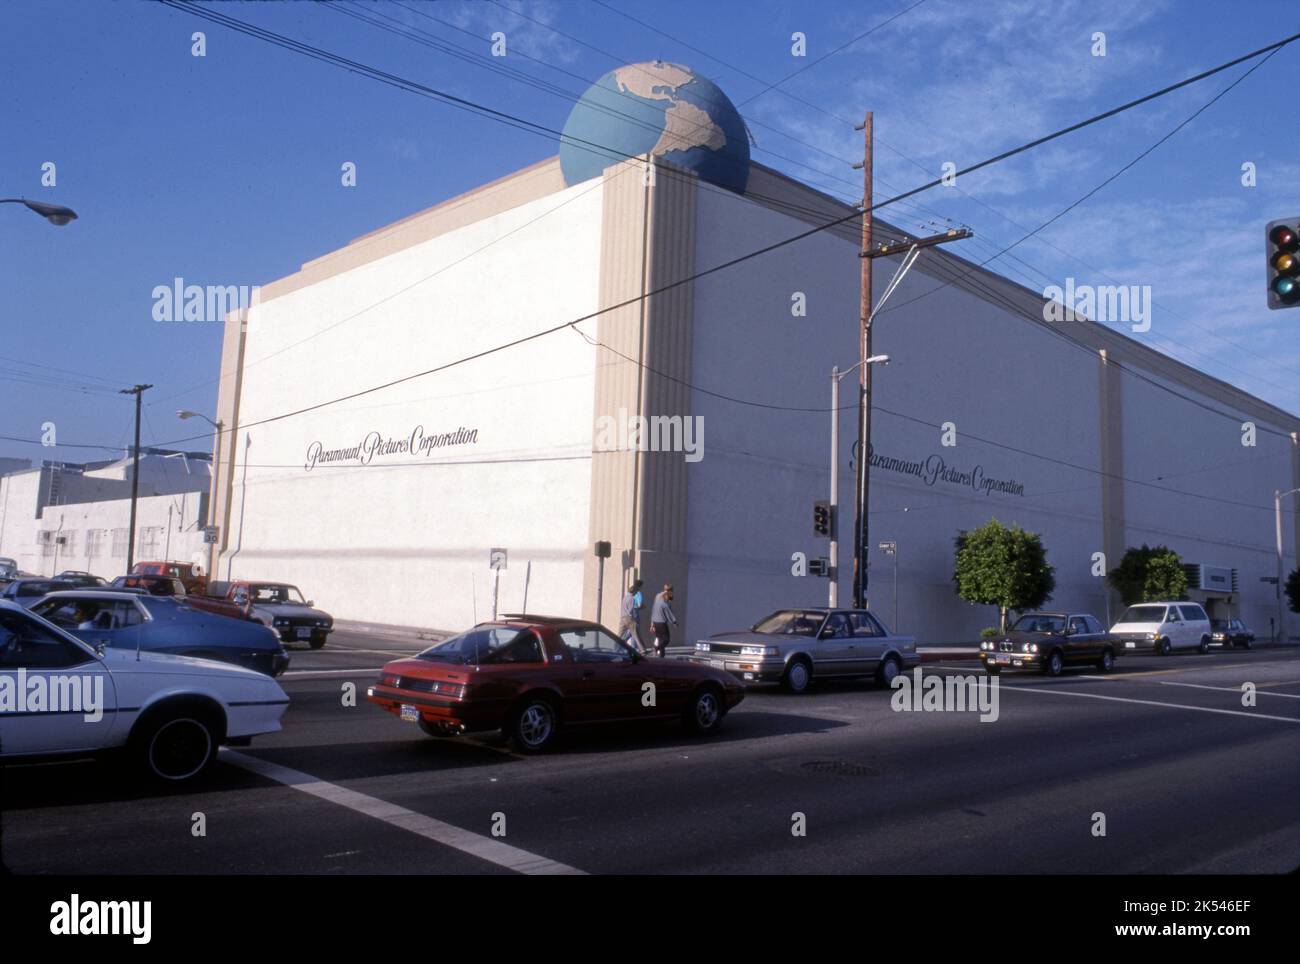 Paramount Studios, formerly RKO Studios, on Melrose Ave. in Hollywood, CA. Stock Photo